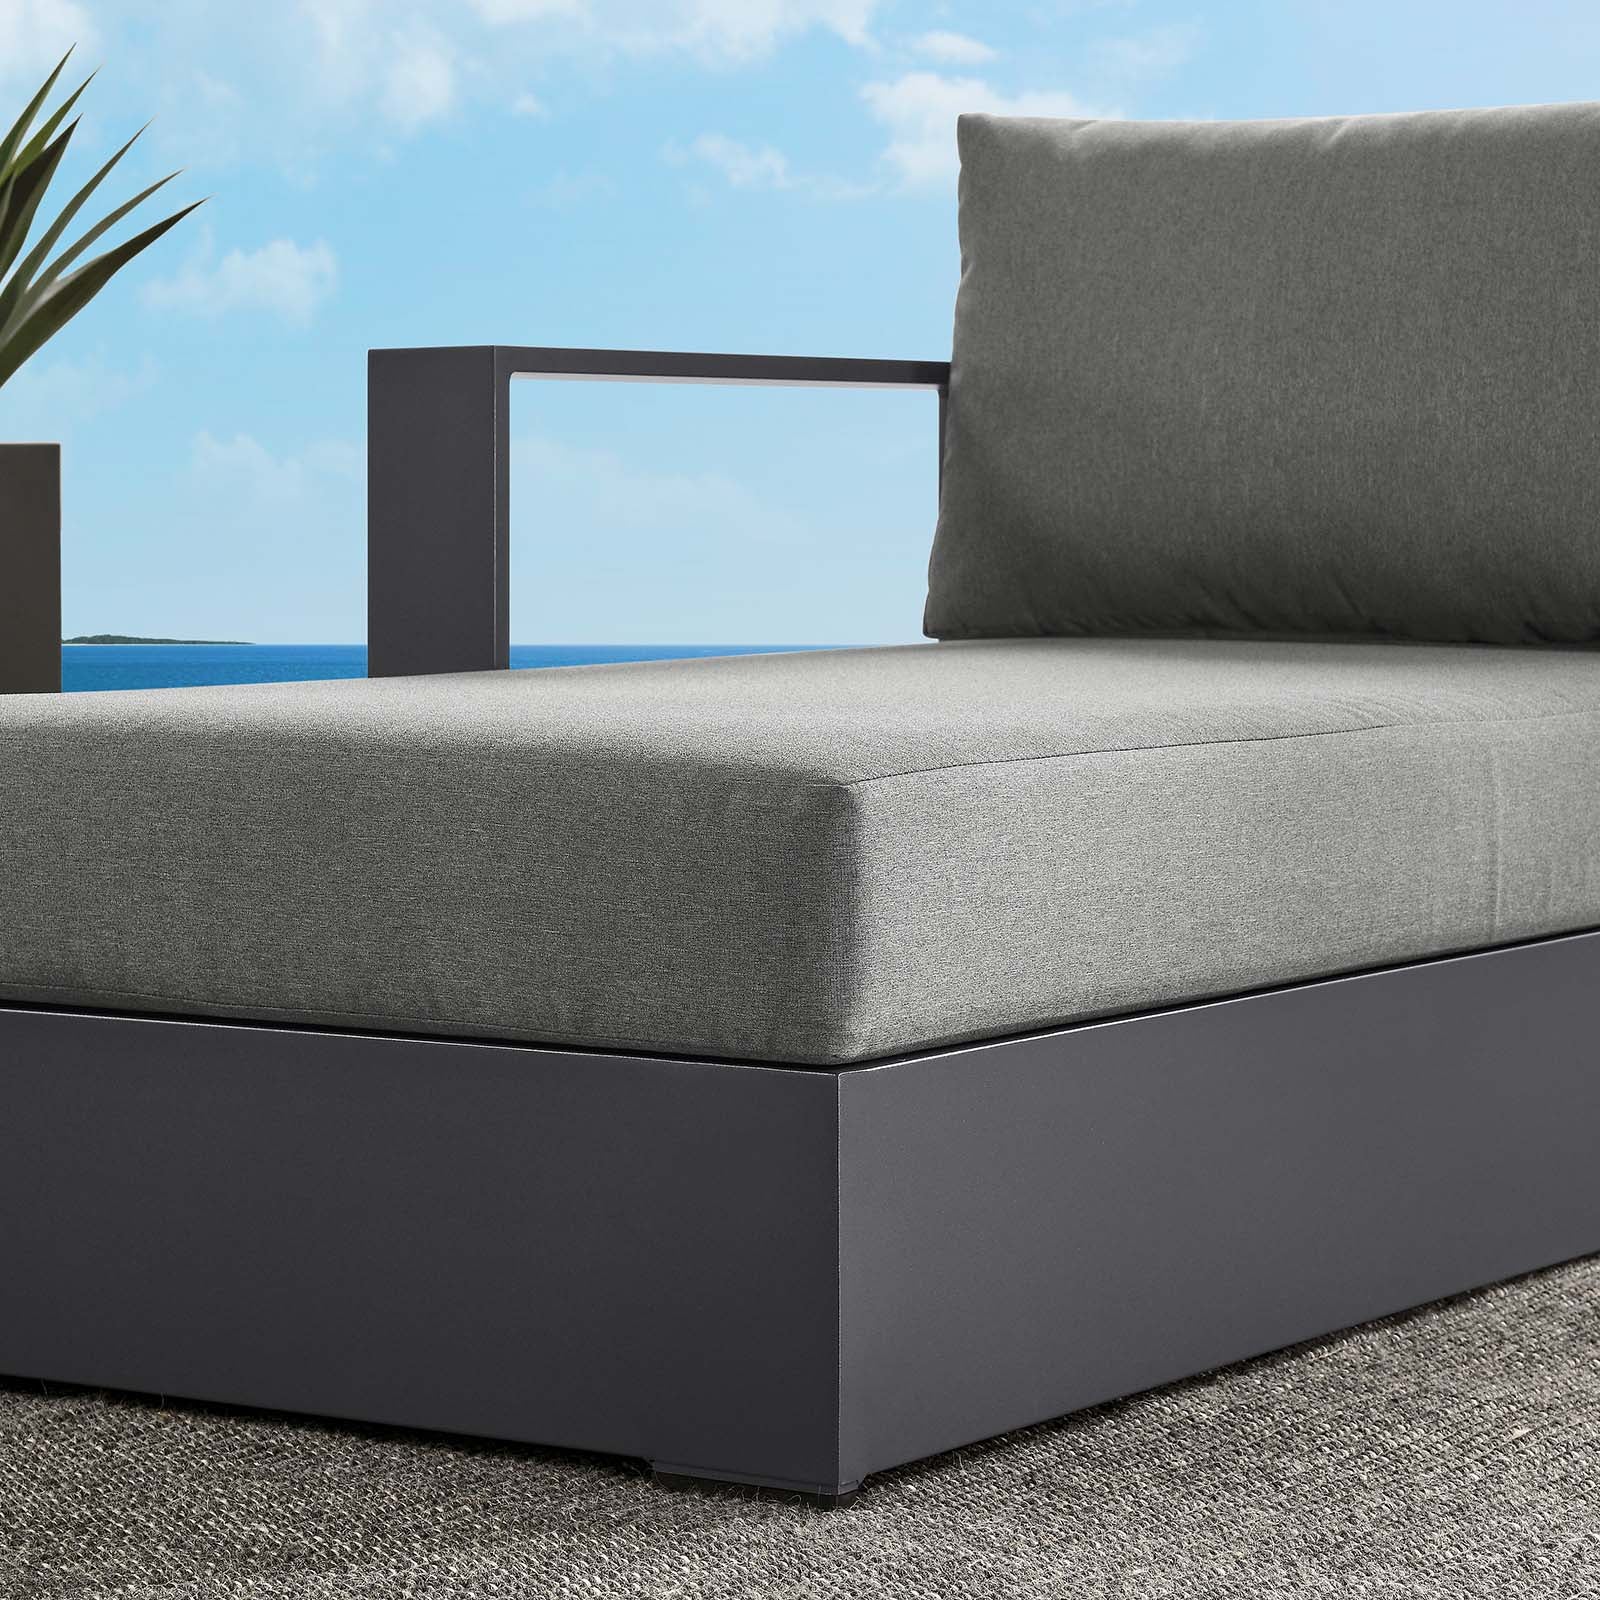 Tahoe Outdoor Patio Powder-Coated Aluminum Modular Left-Facing Chaise Lounge-Outdoor Chaise-Modway-Wall2Wall Furnishings